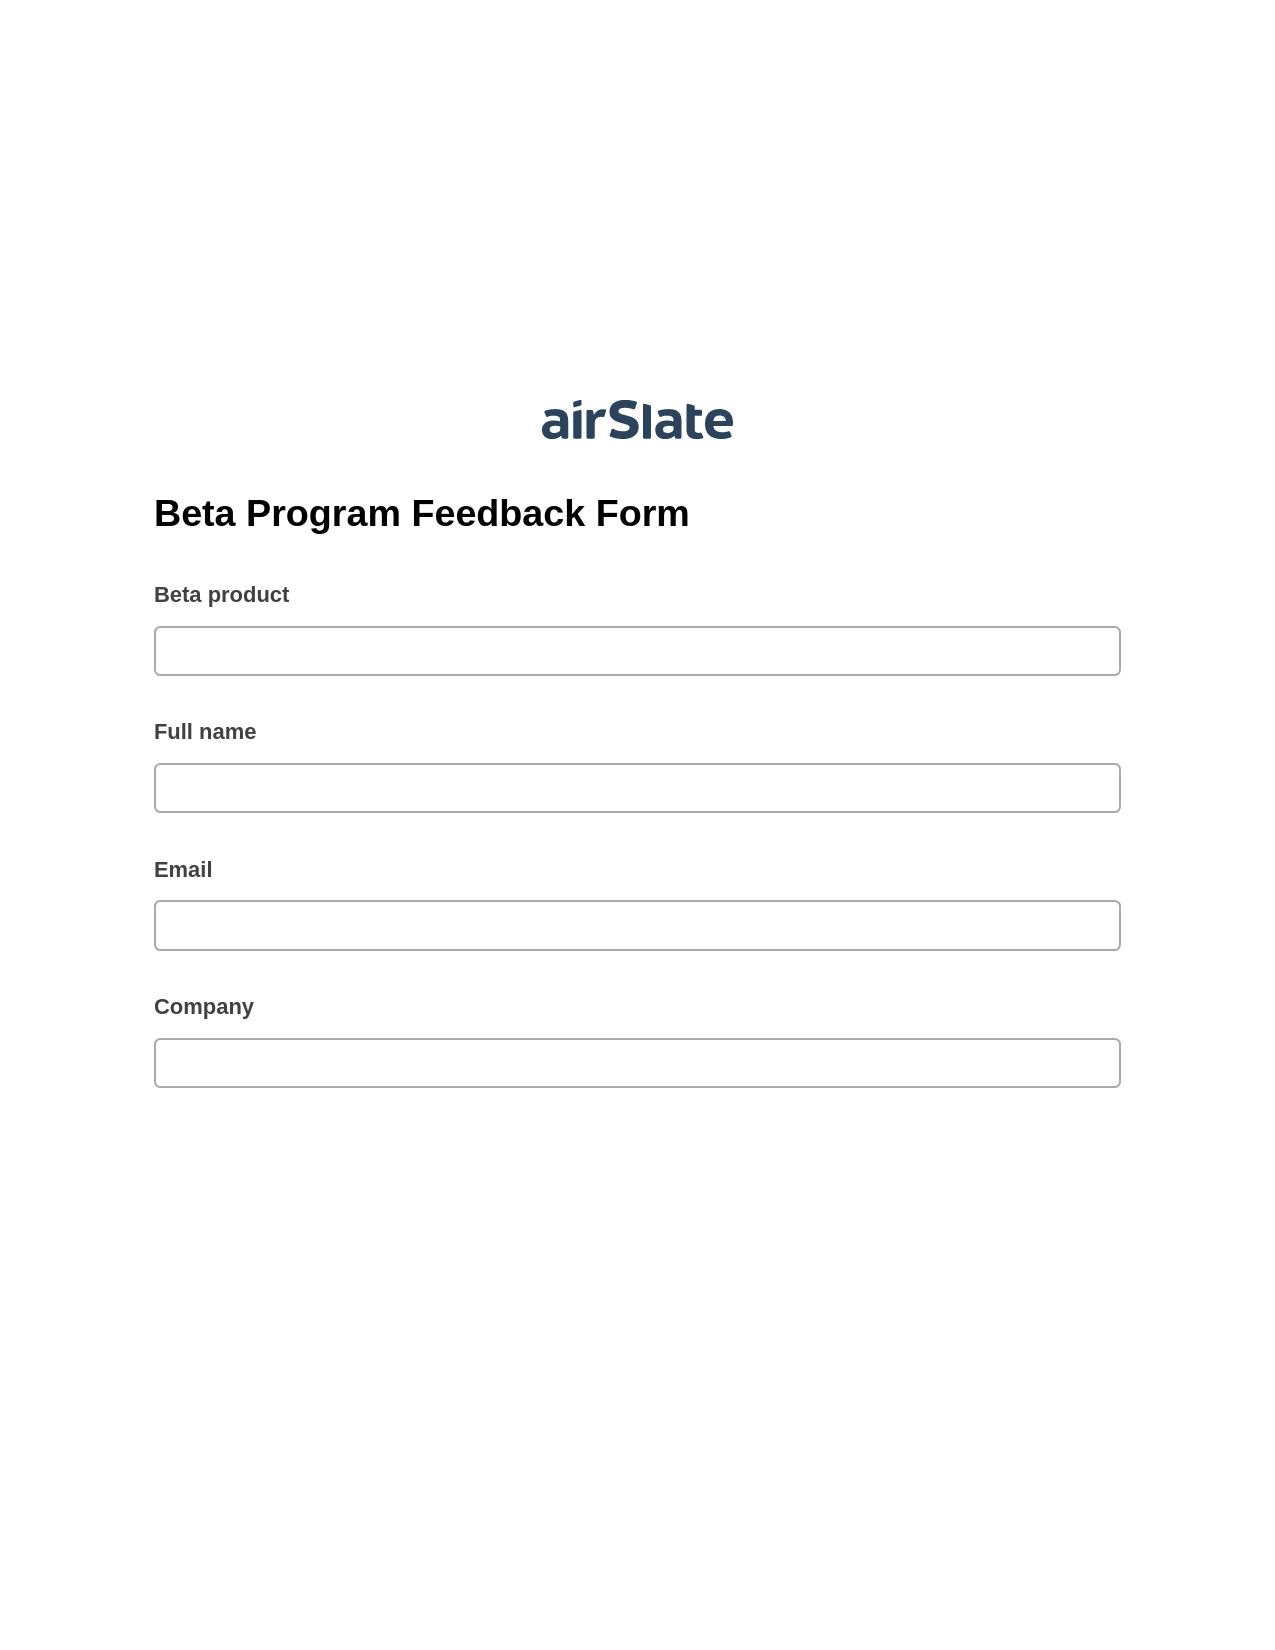 Multirole Beta Program Feedback Form Pre-fill from another Slate Bot, Add Tags to Slate Bot, Export to Google Sheet Bot